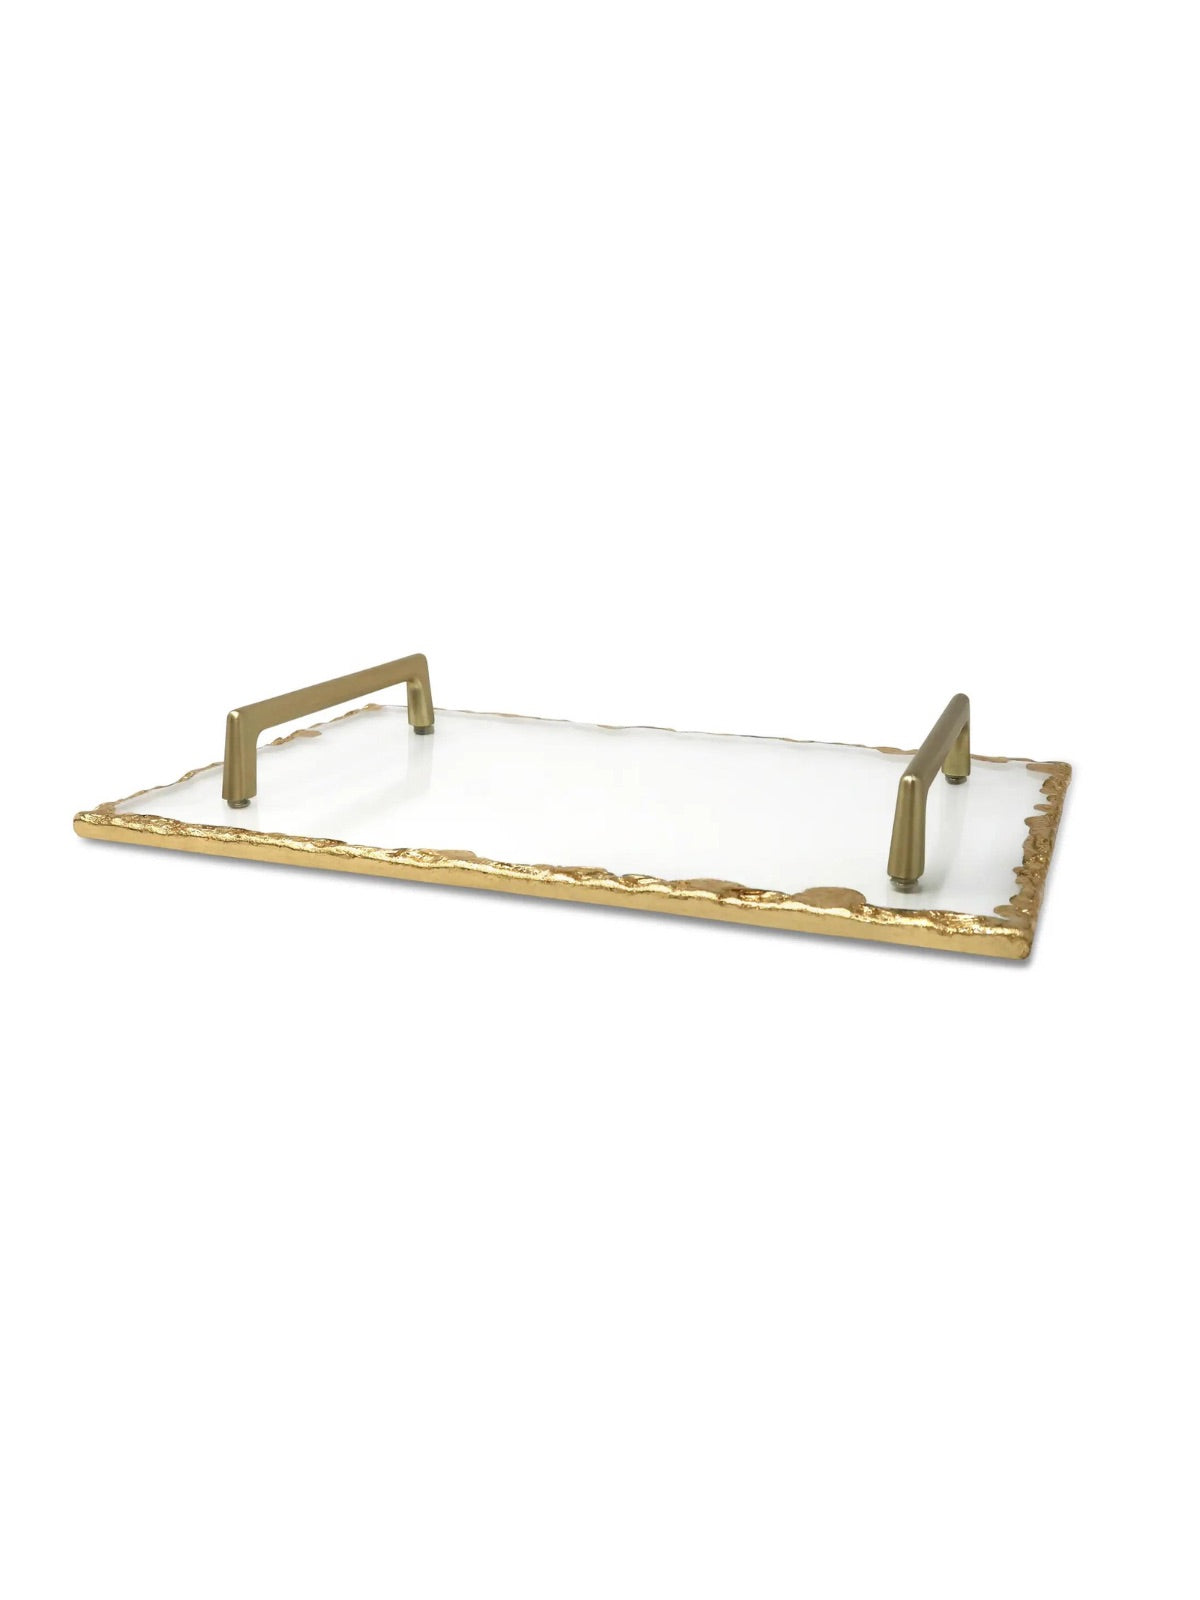 Glass Tray with Gold Rim and Handles.